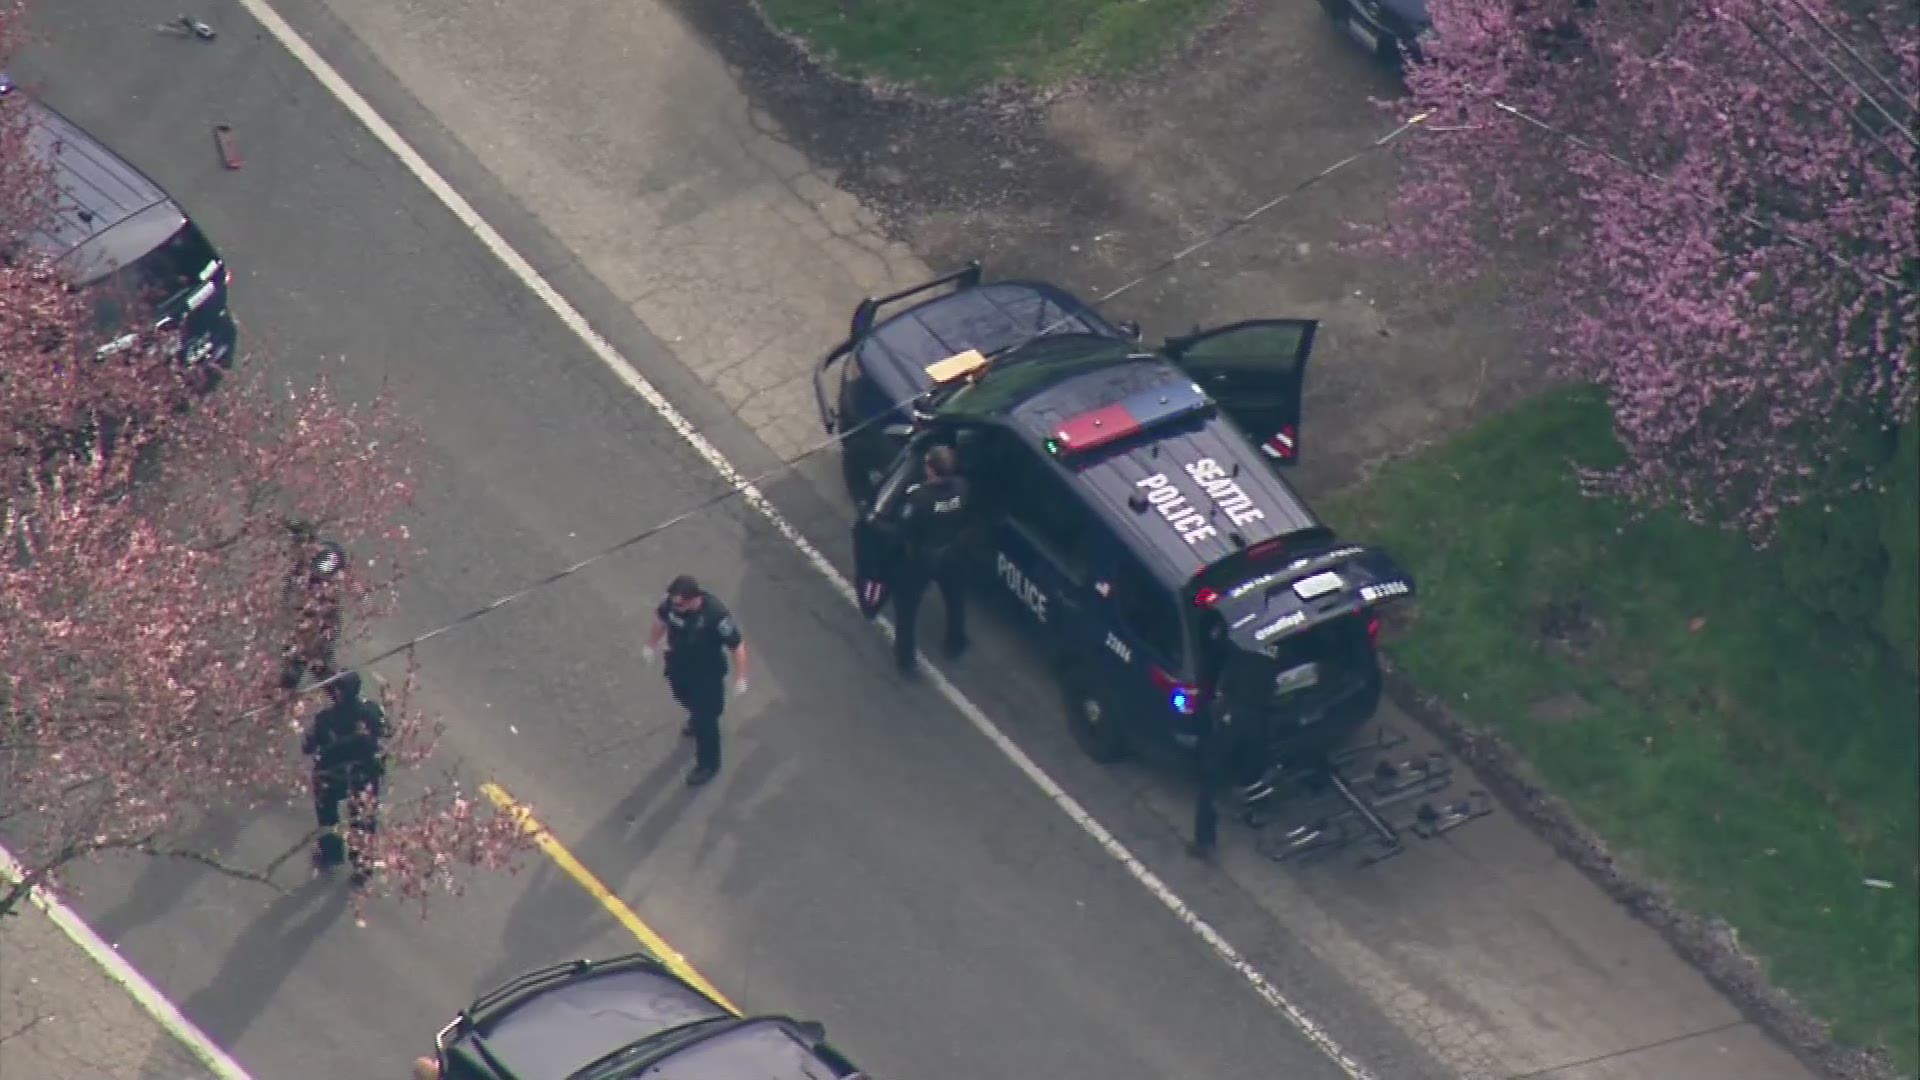 Police on scene of a shooting with multiple victims near 120th and Sandpoint Way in Seattle.